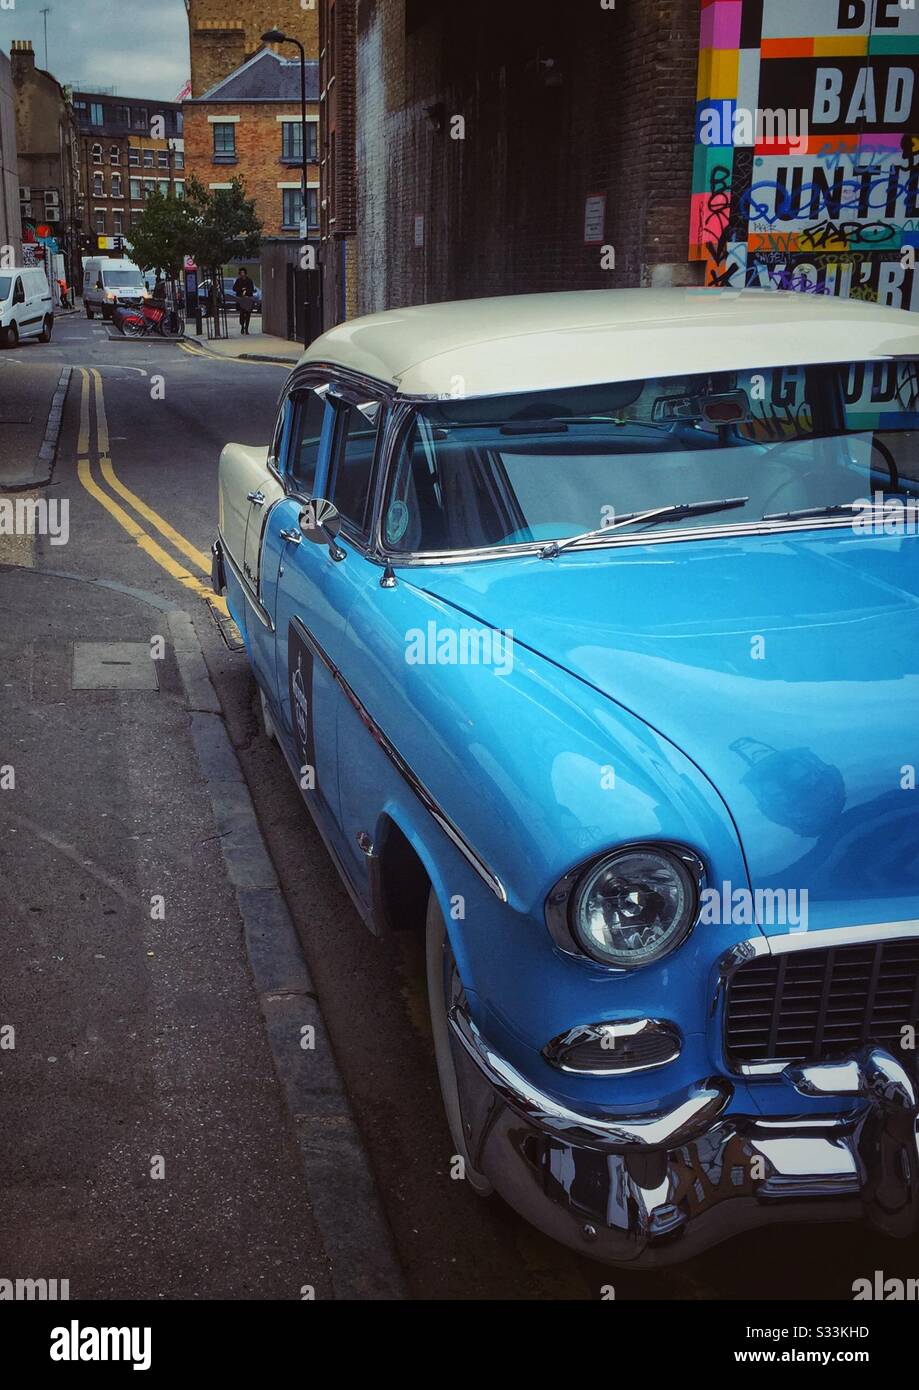 A Cuban Colectivo Car parked in Shoreditch London Stock Photo